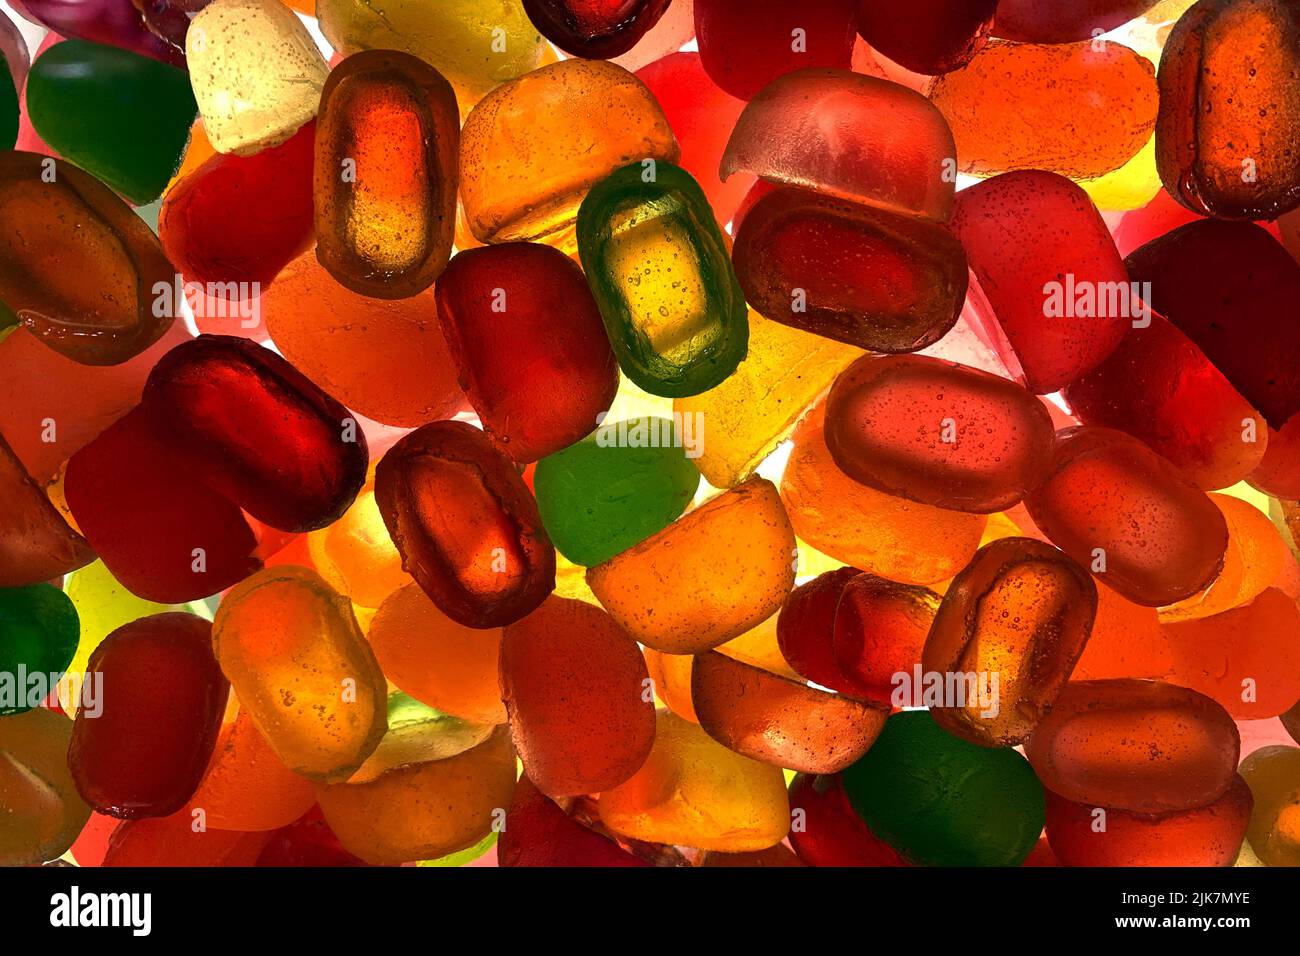 Candy pattern. silhouette of many multi colored yummy bright candies in different shapes. Stock Photo